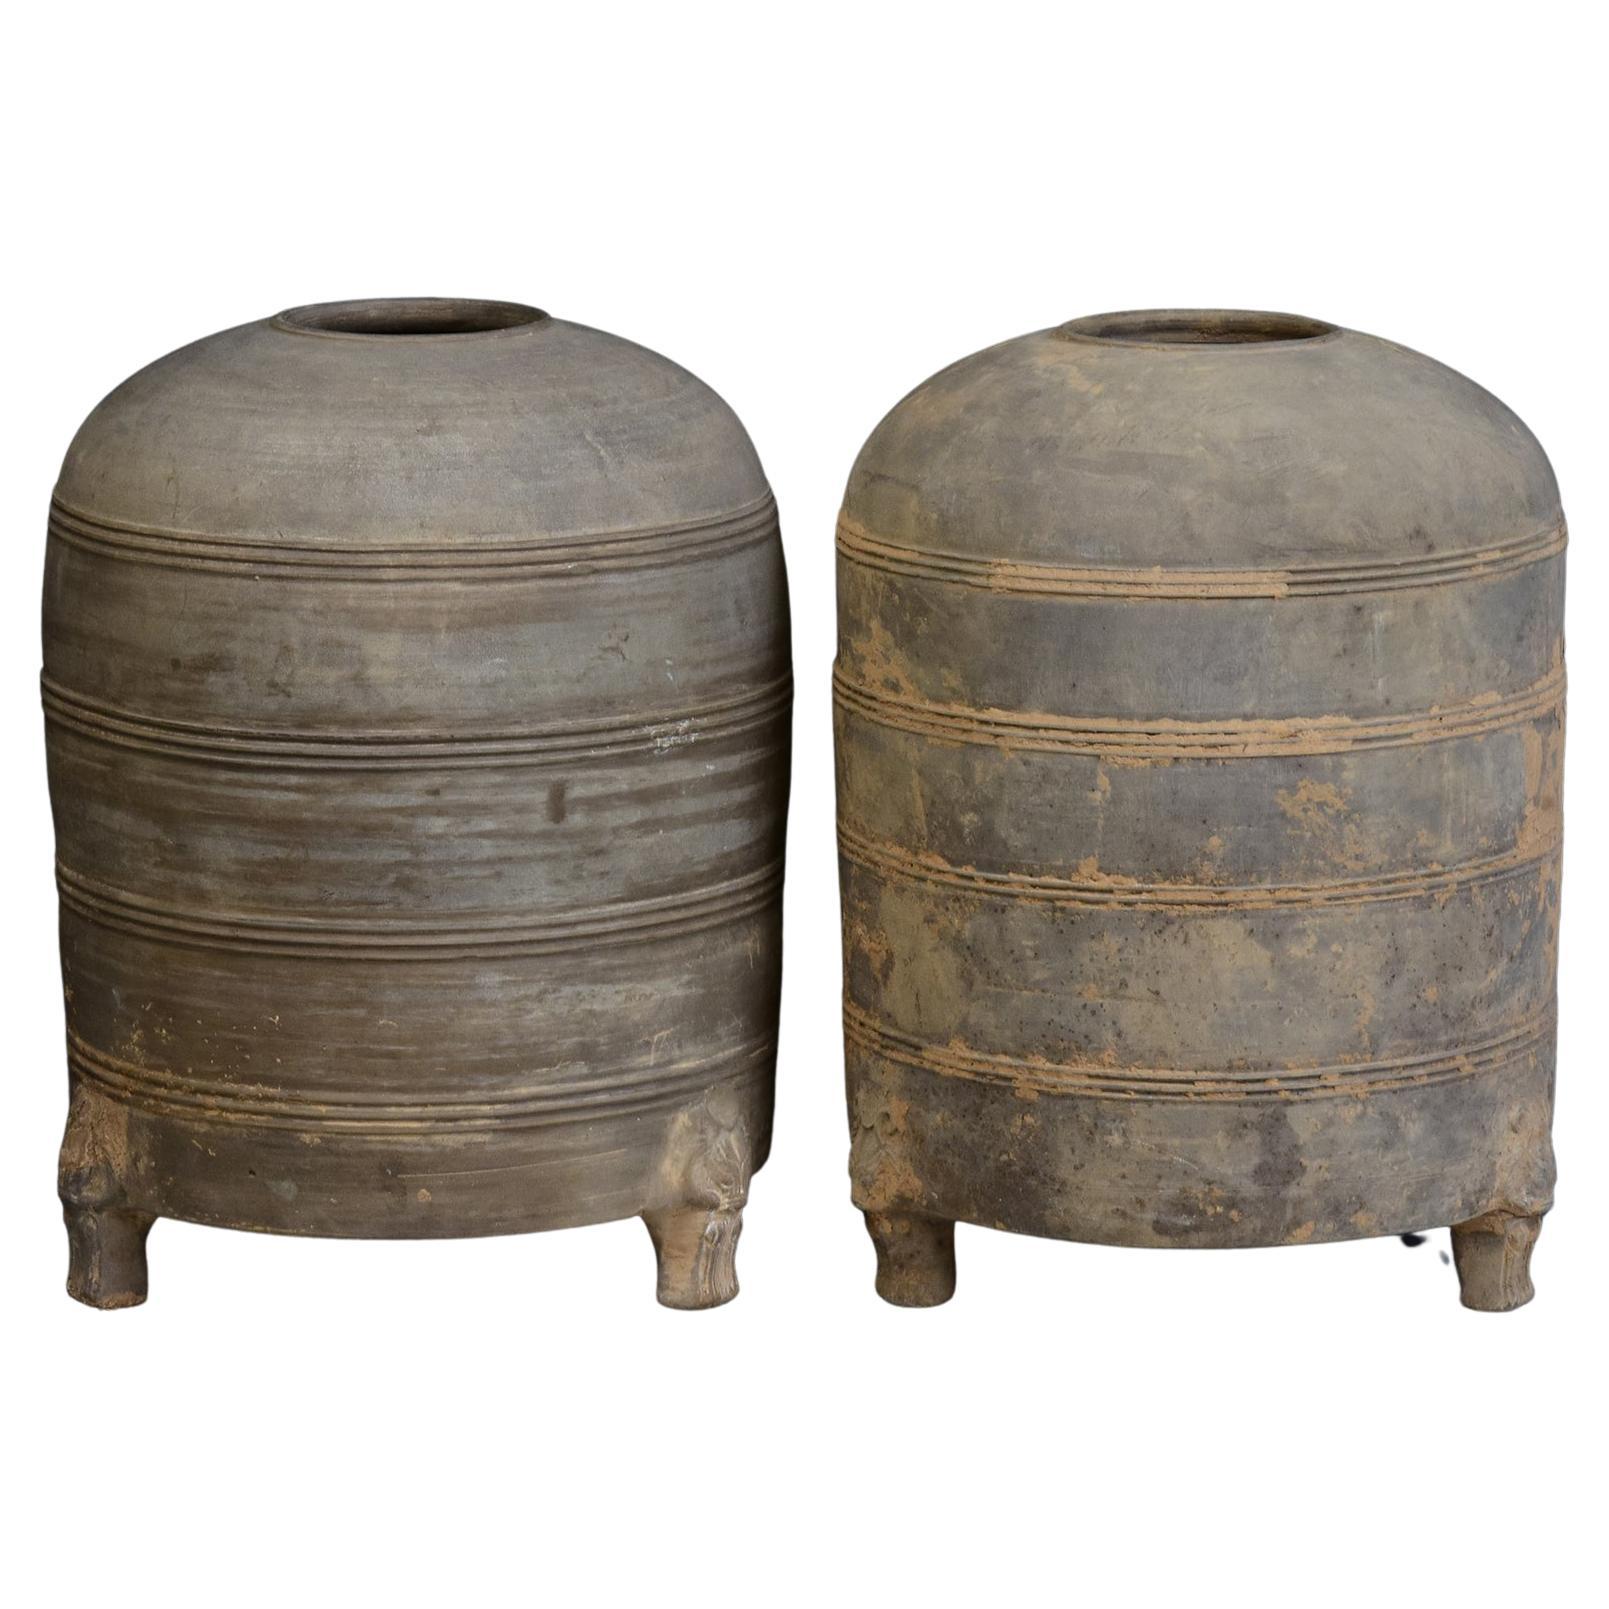 Han Dynasty, A Pair of Antique Chinese Pottery Granary Jars